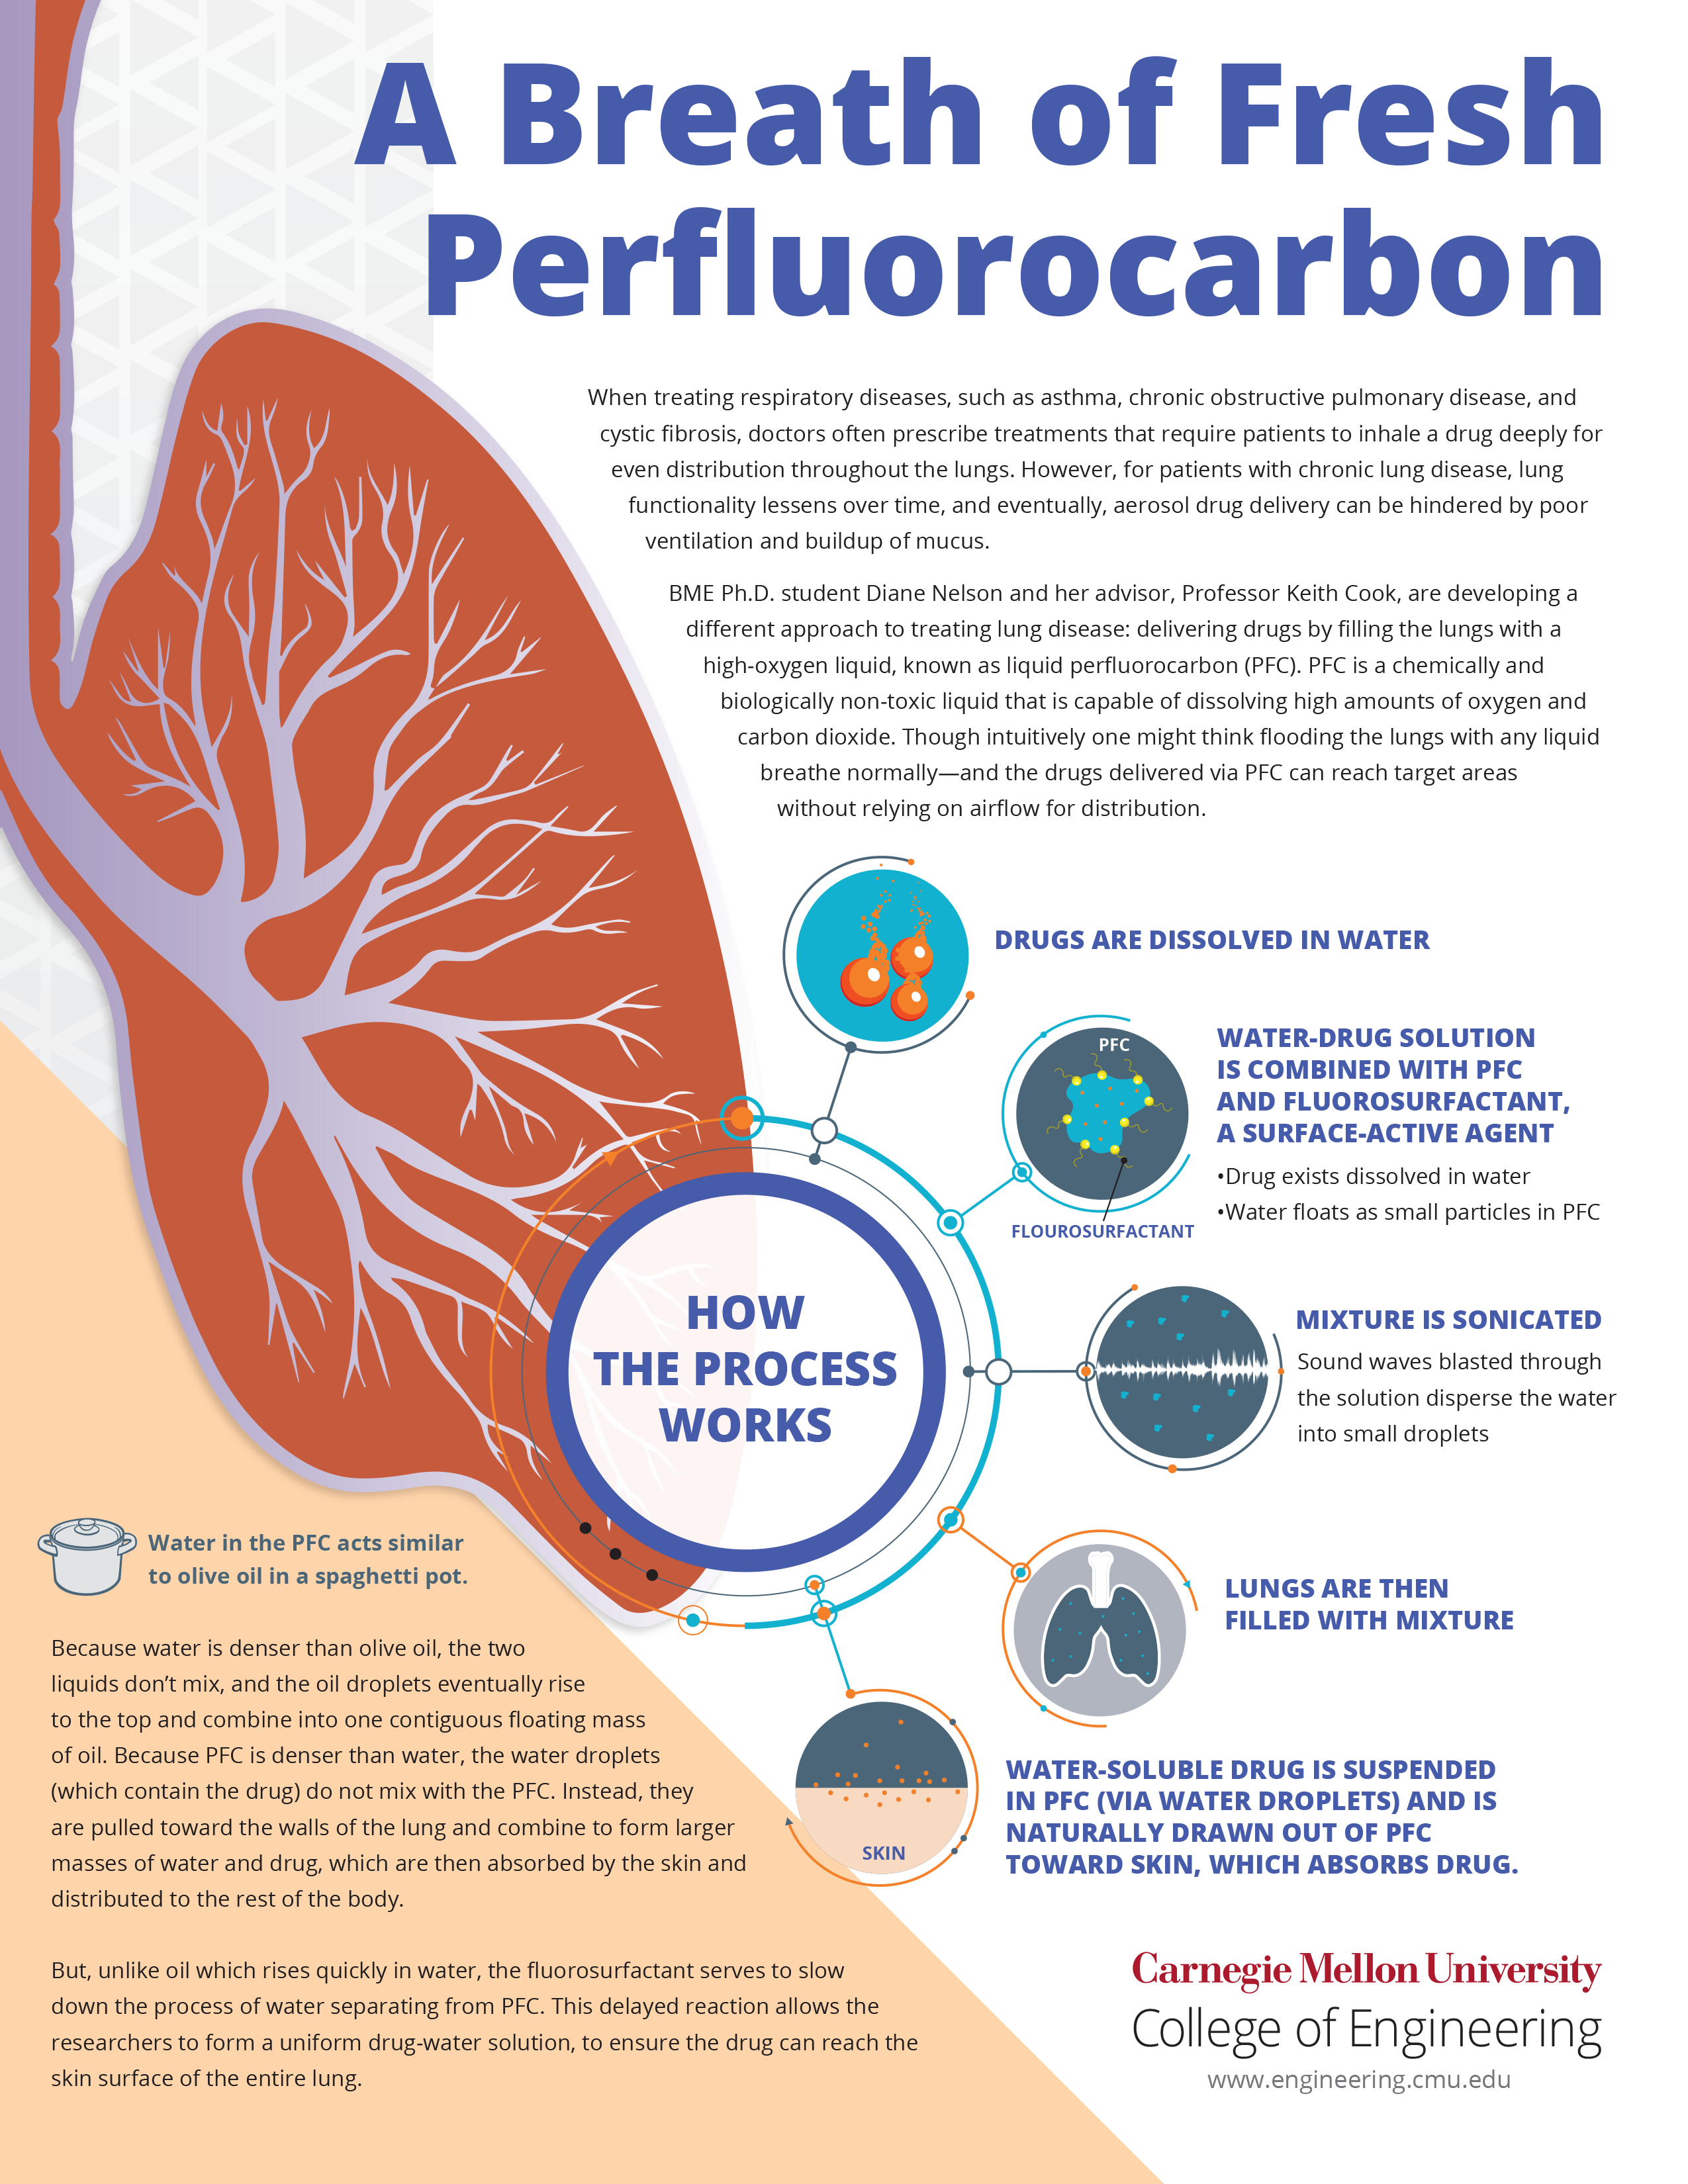 Infographic on liquid drug delivery to lungs